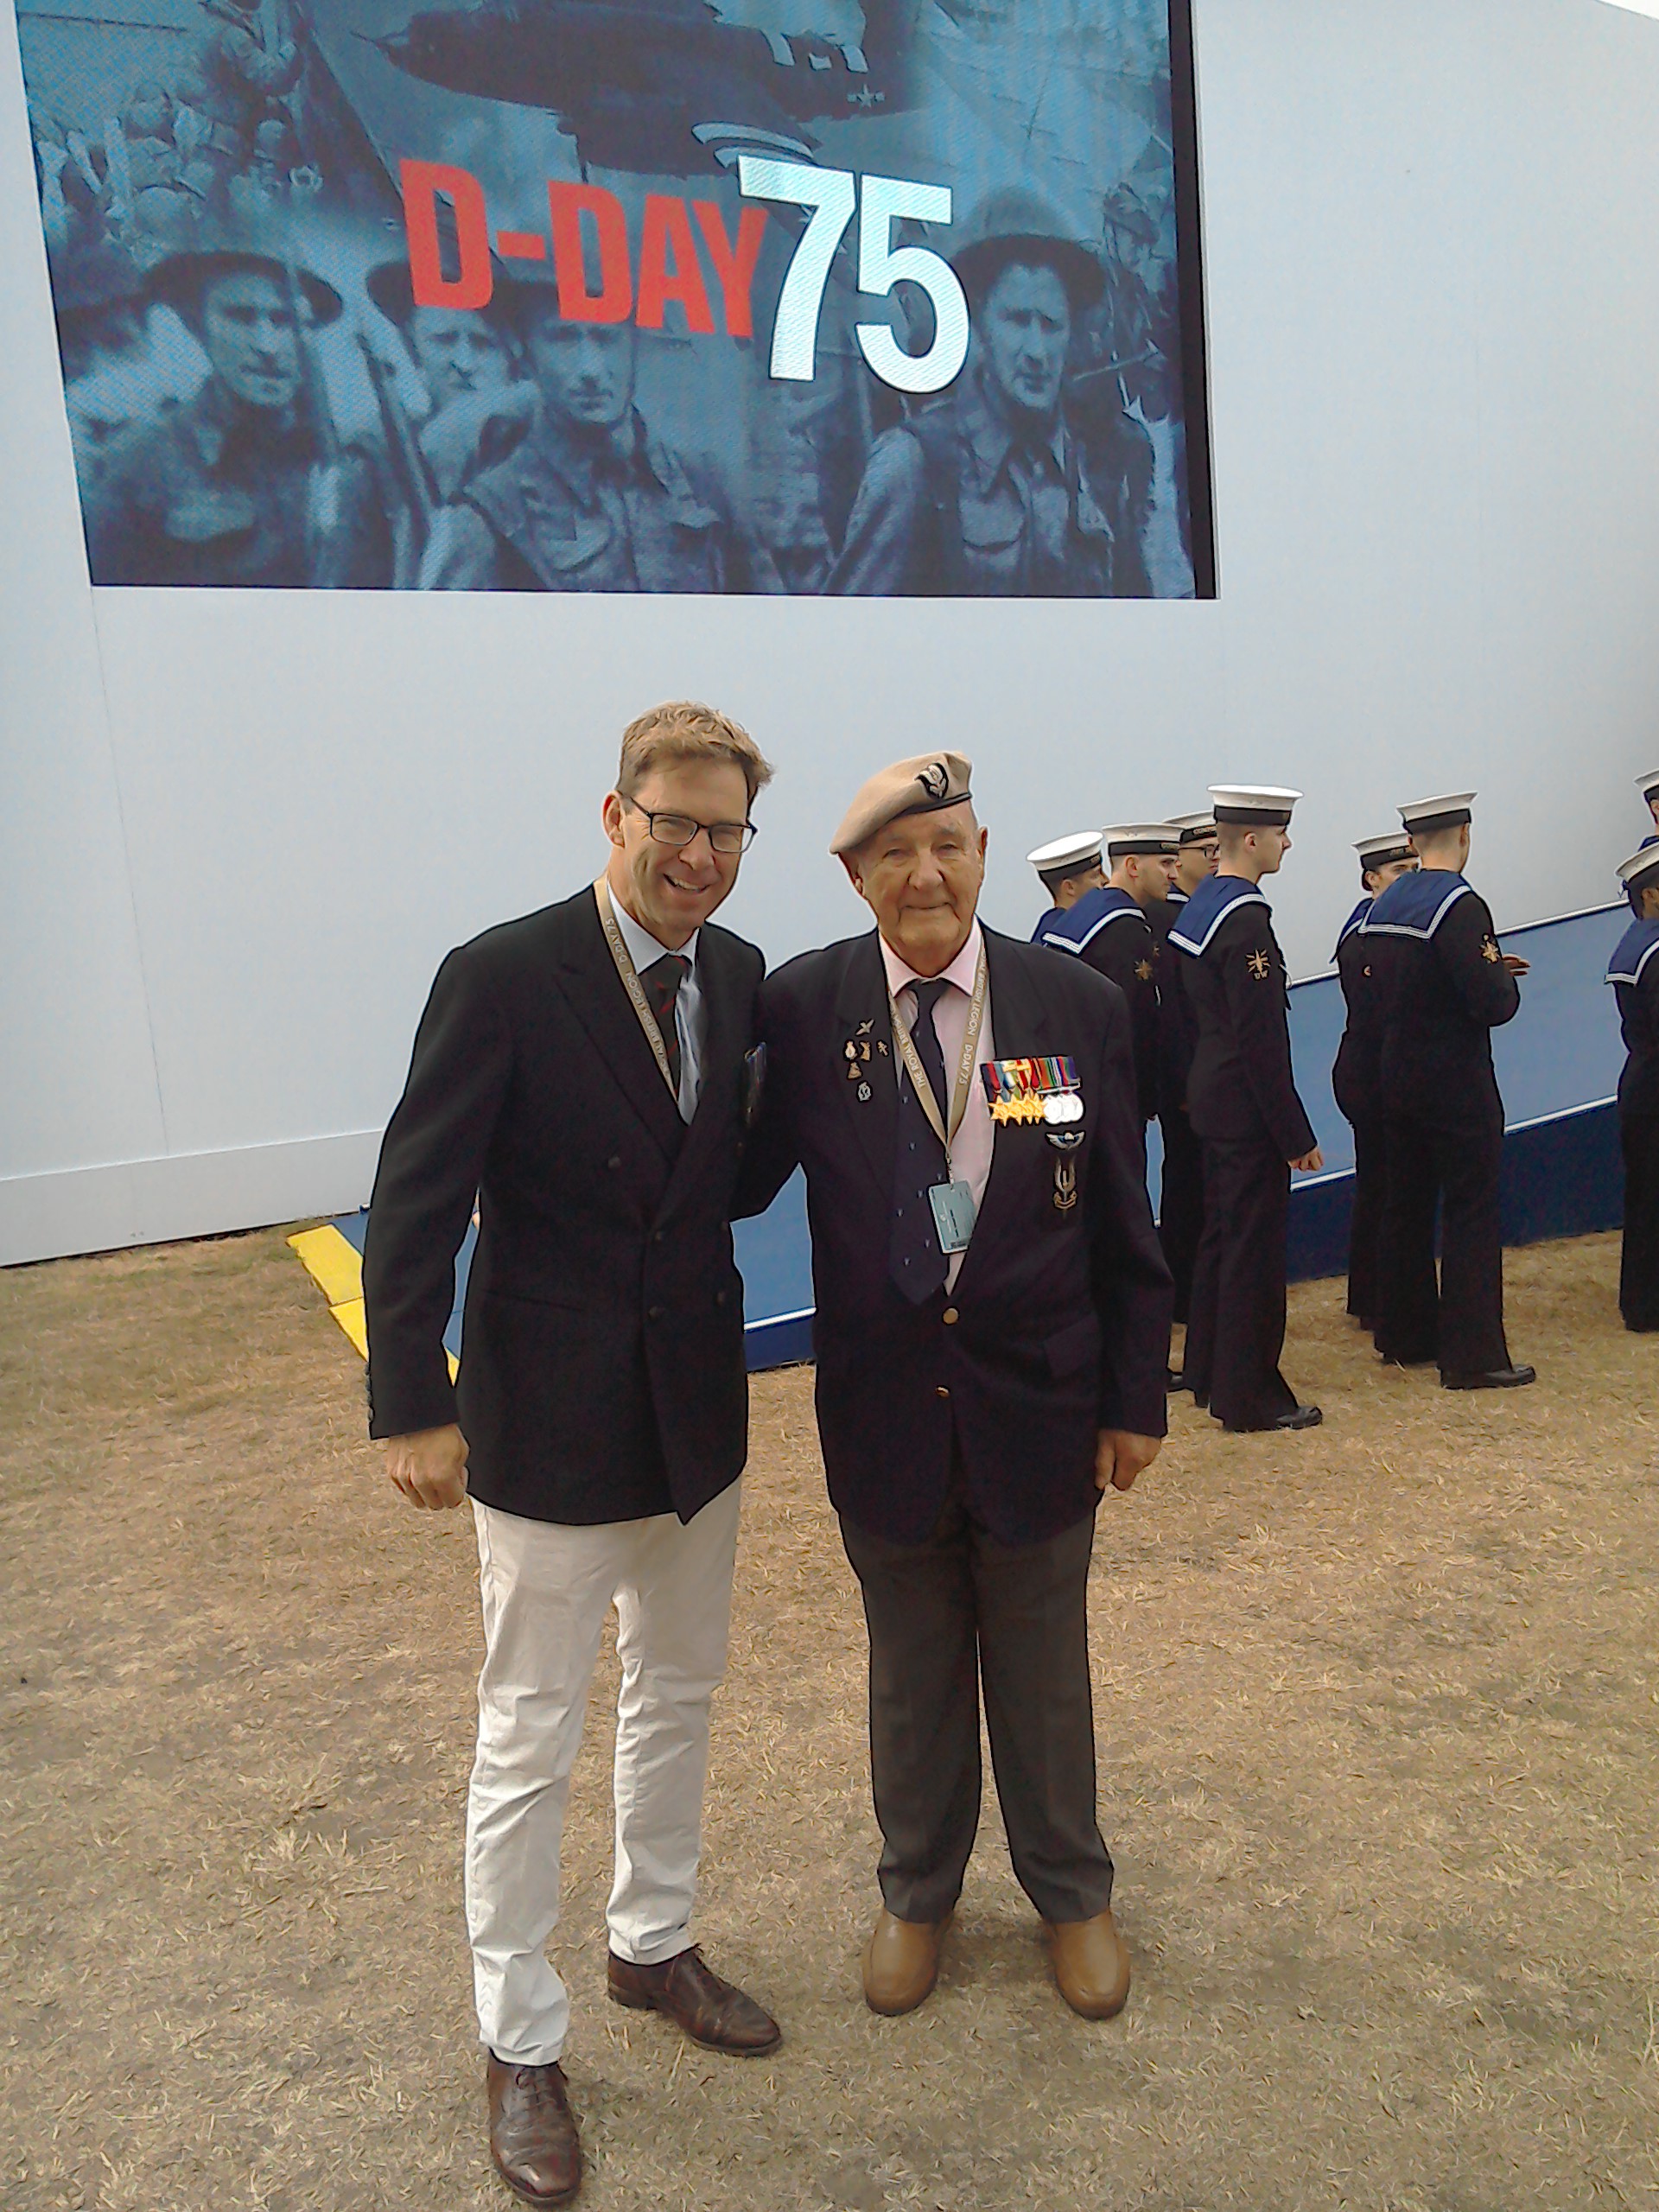 Joe with Tobias Ellwood, MP, the Under Secretary of State for Defence